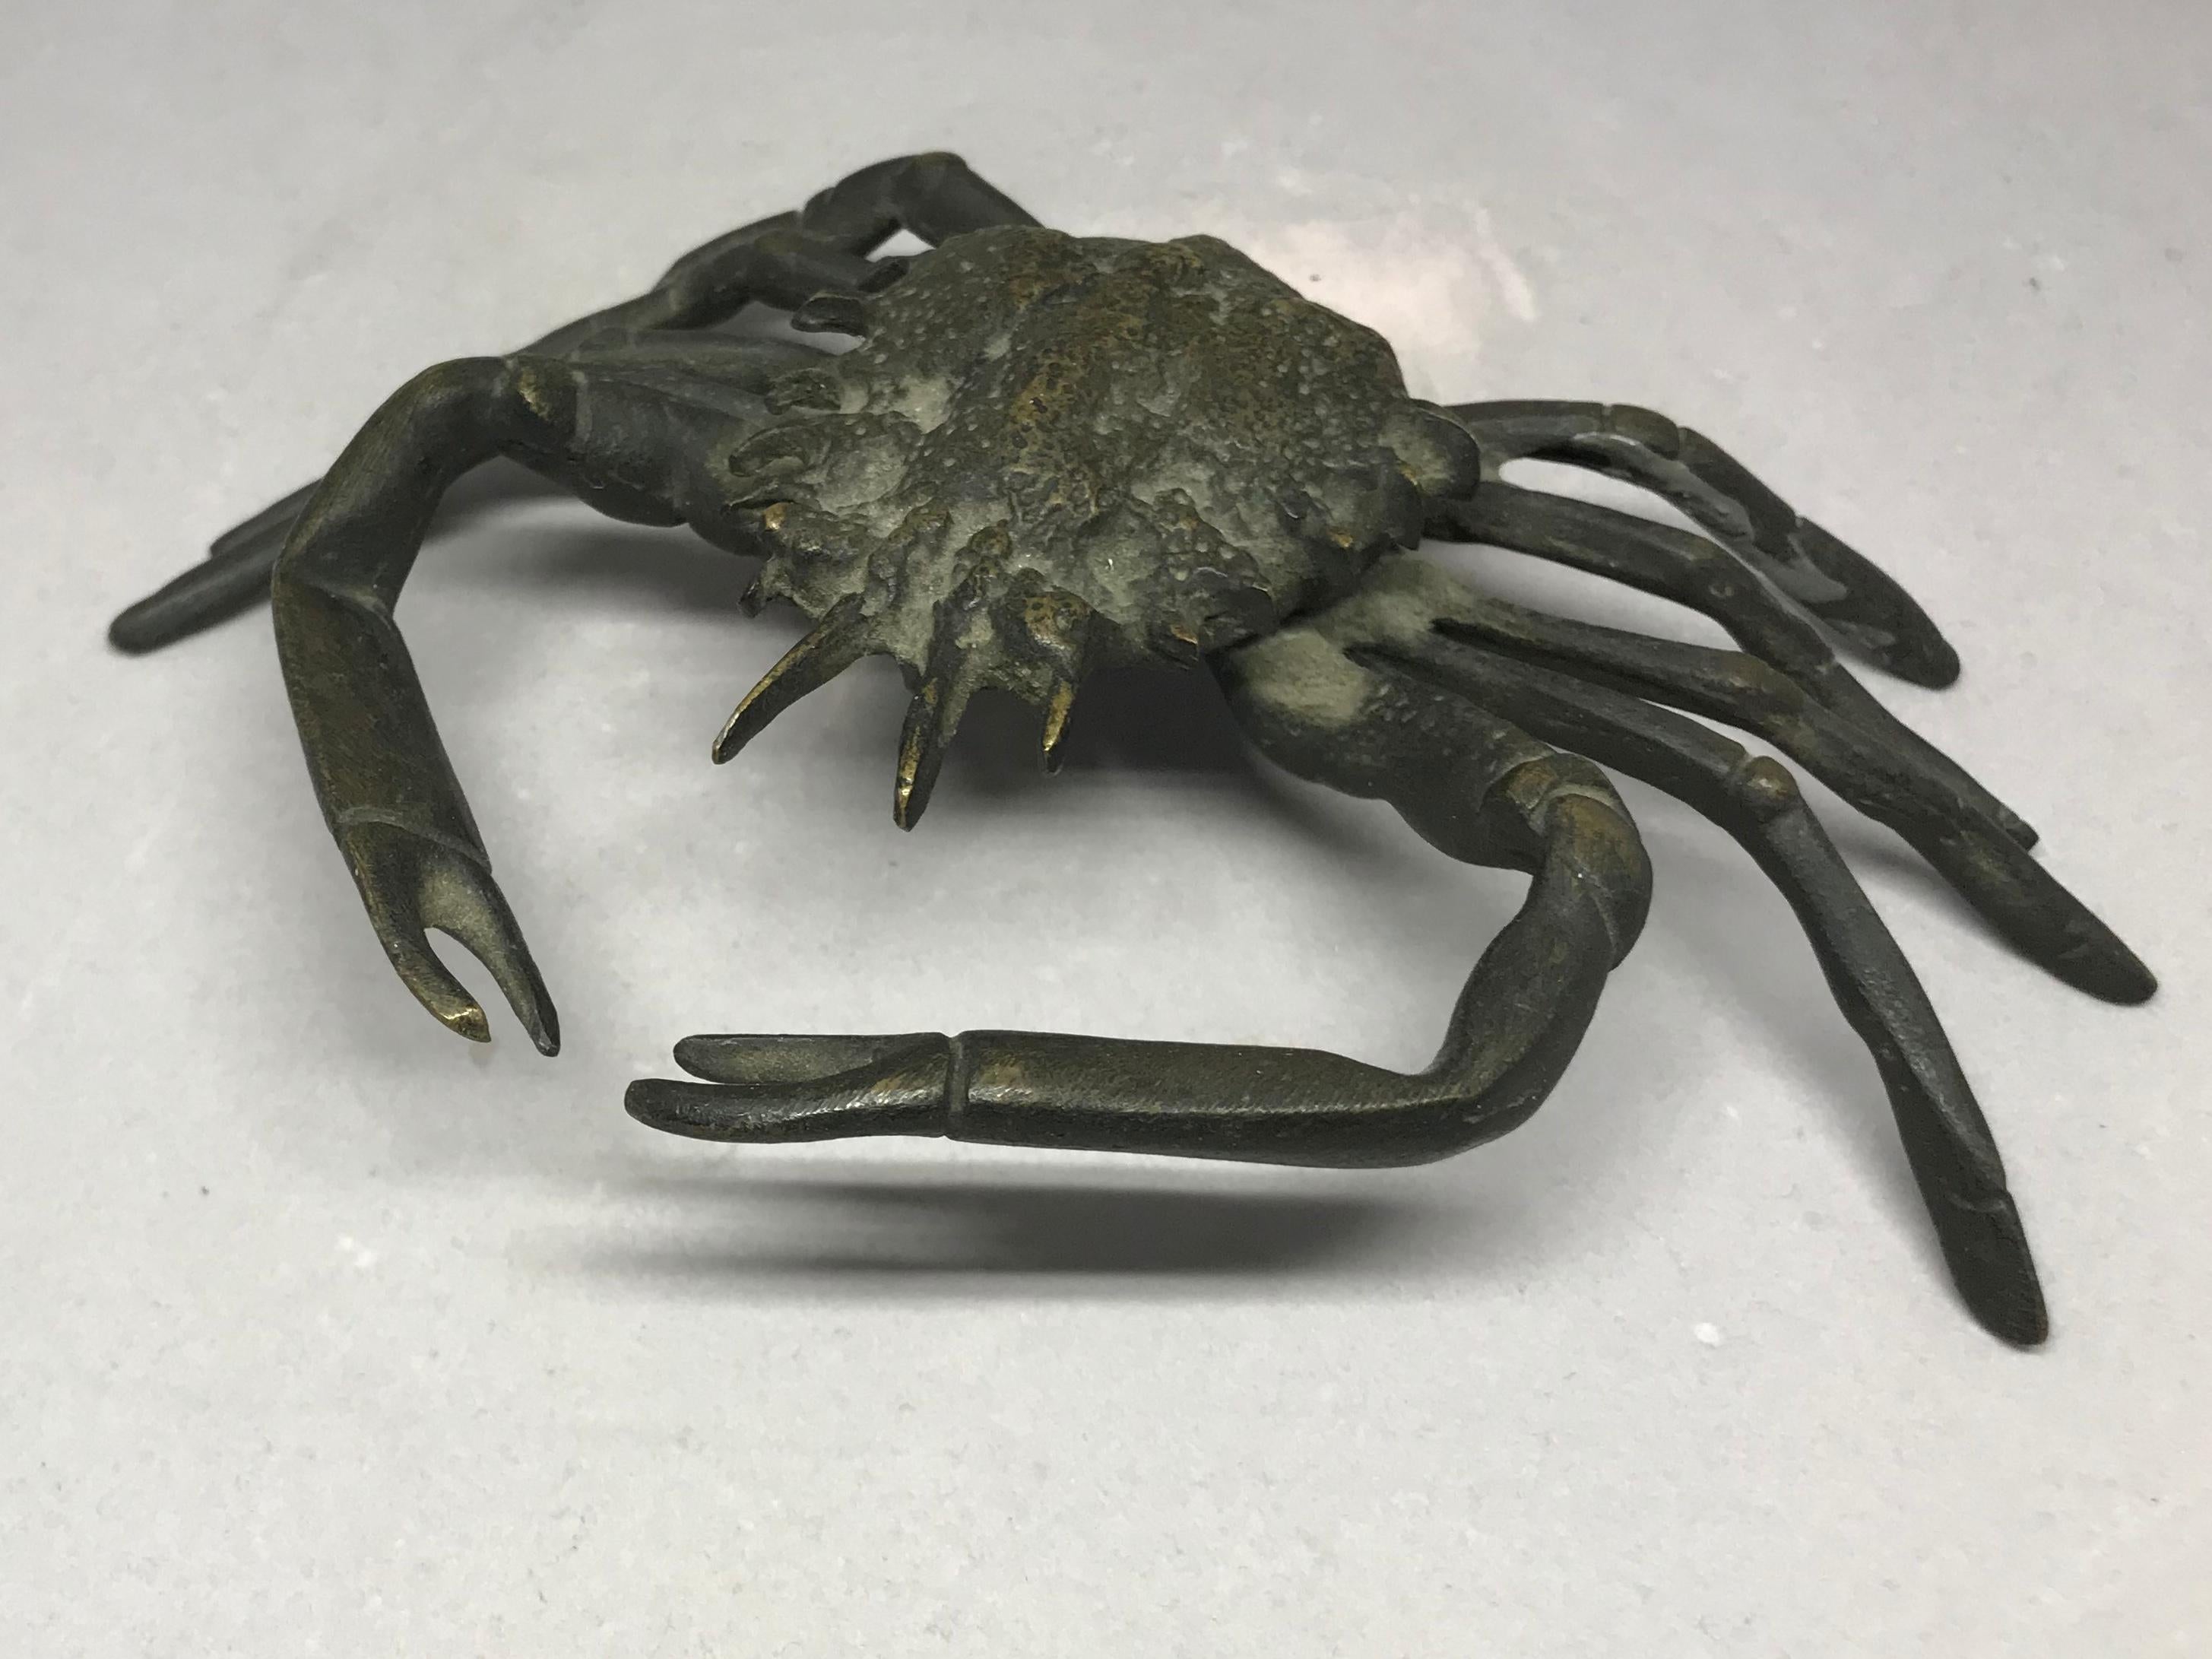 Italian lifesize bronze crab. Antique Neapolitan crab in rich bronze, Italy, early 20th century.
Dimensions: 7